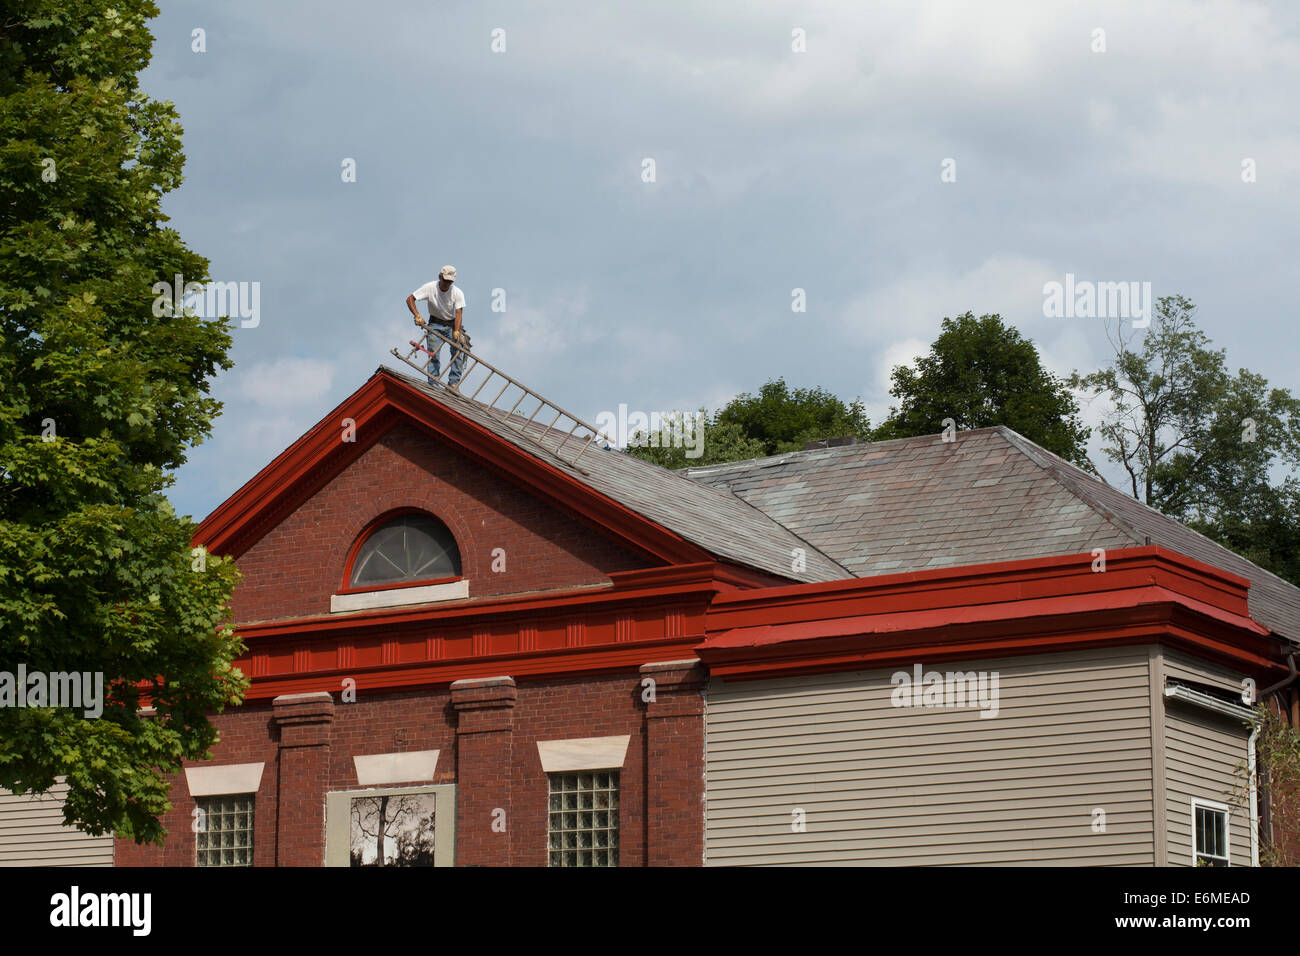 A roofer moves a ladder while repairing an old slate roof on a former schoolhouse. Stock Photo